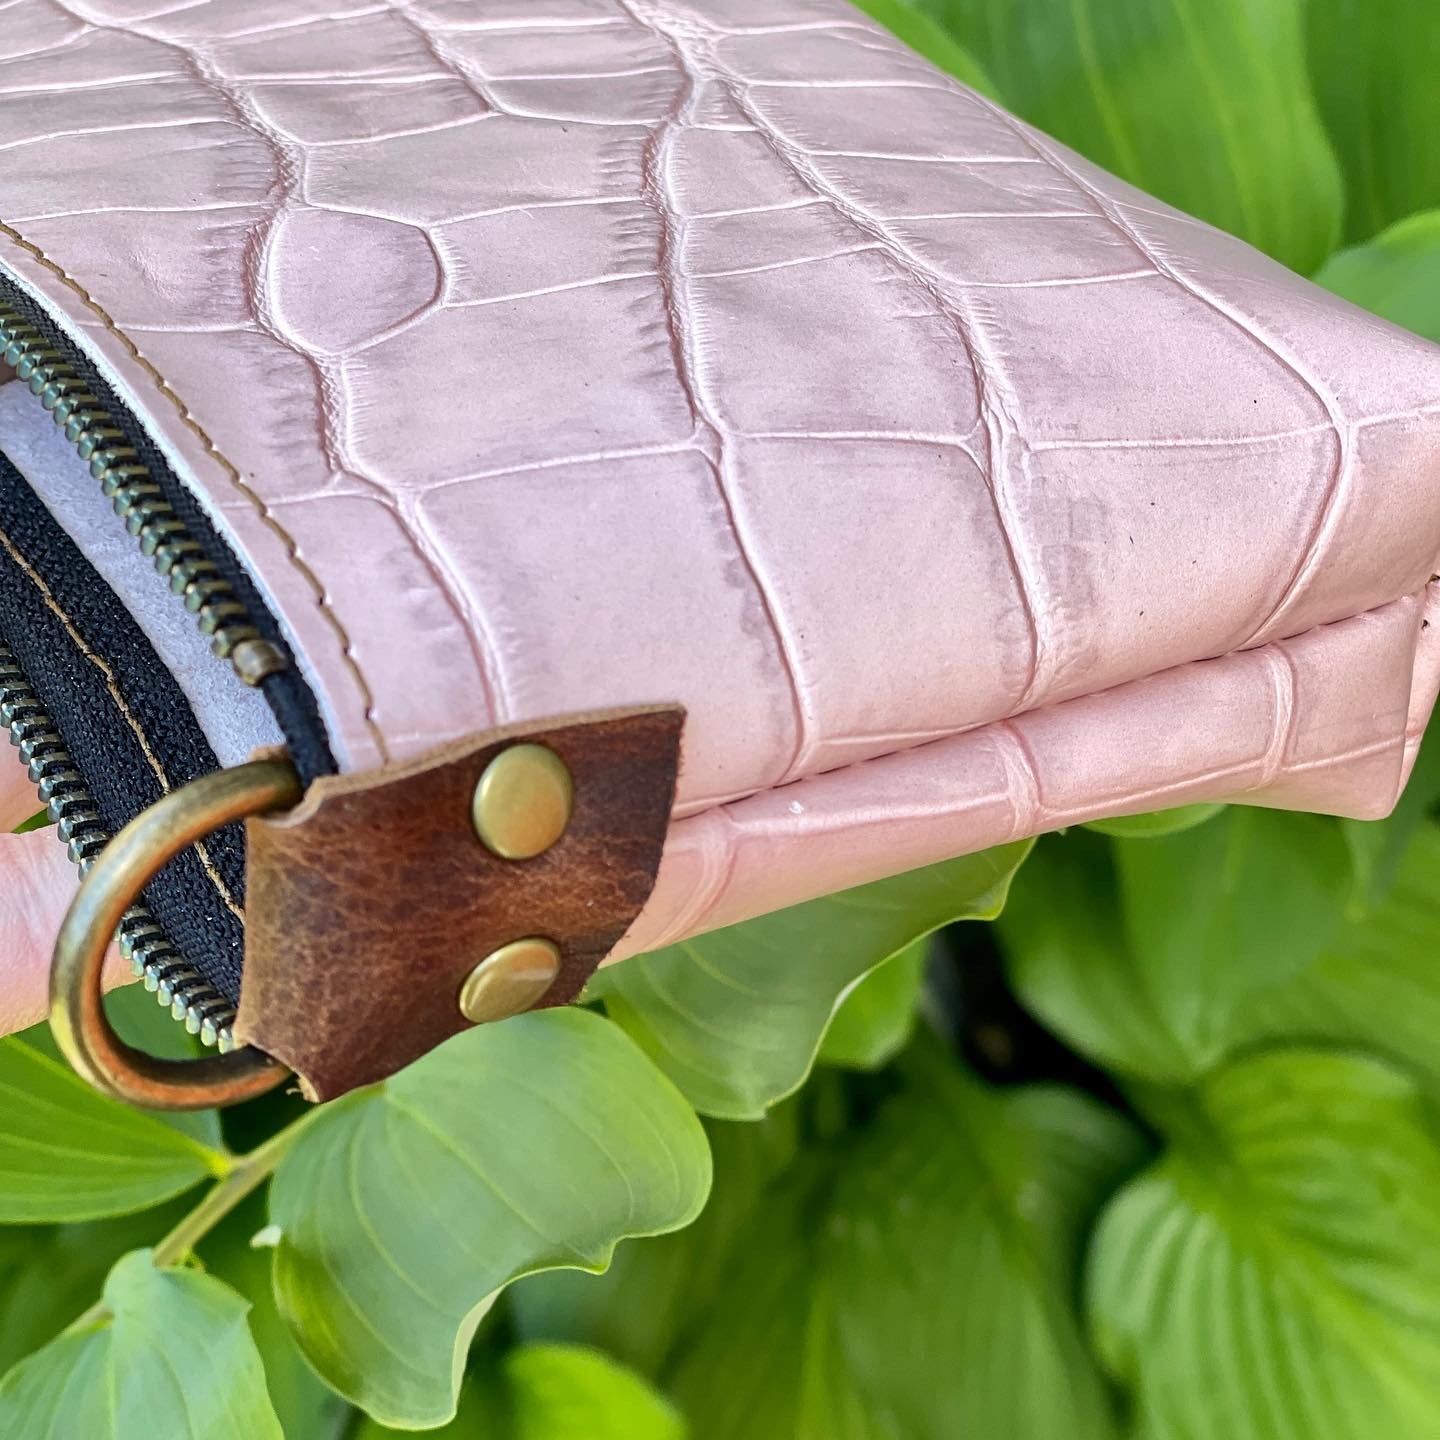 Muted Pink Embossed Leather Pouch